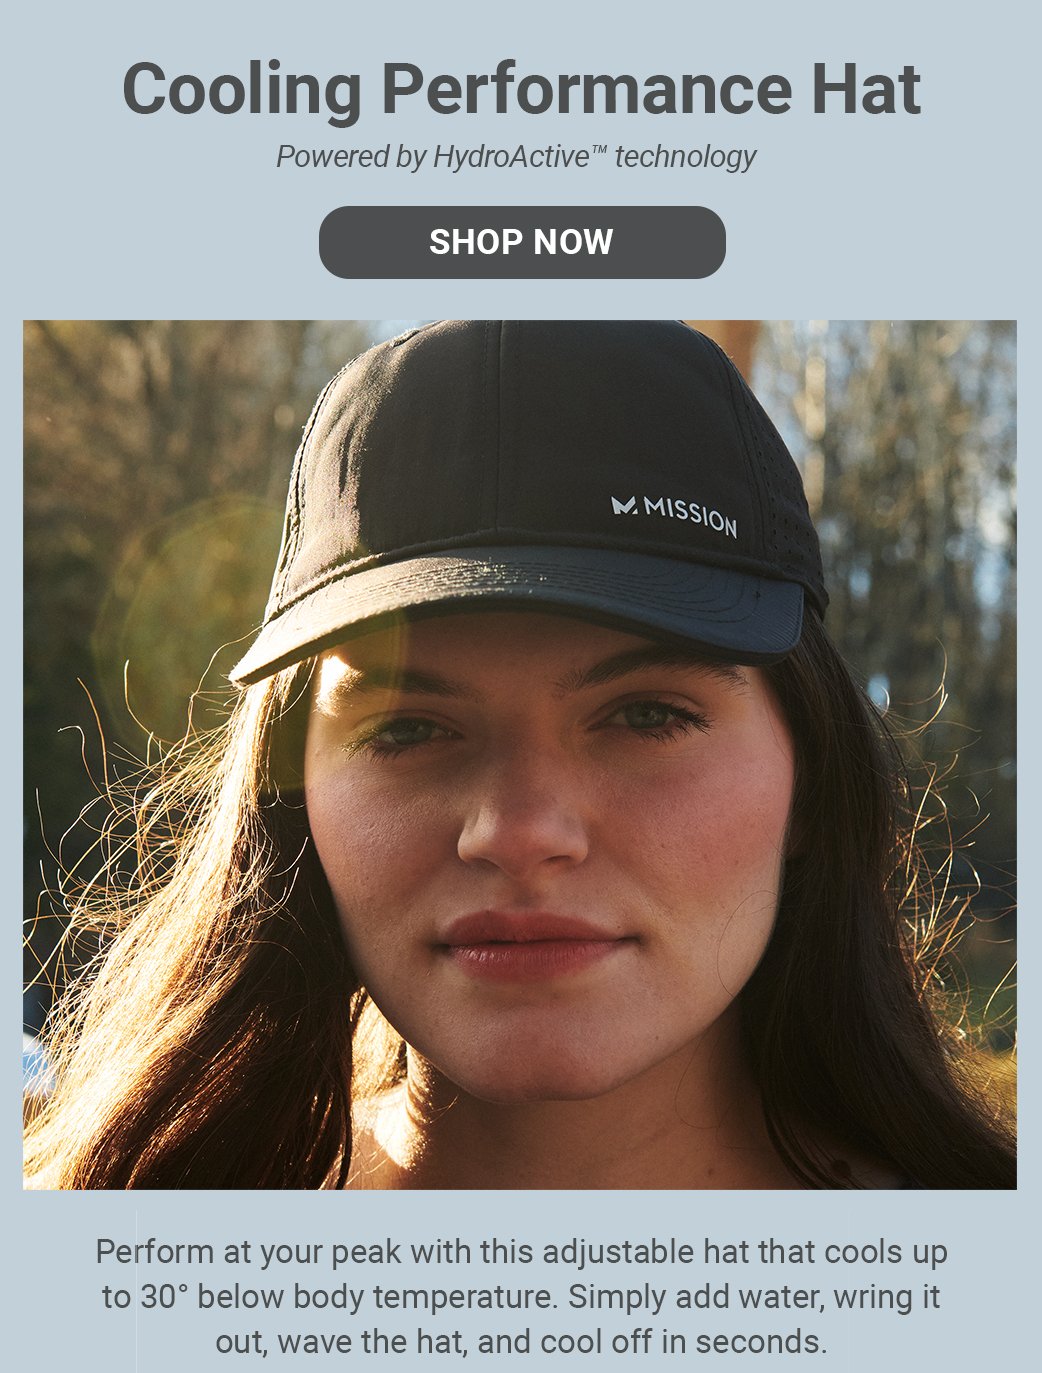 Cooling Performance Hat Powered by HydroActiveTM technology [SHOP NOW]Perform at your peak with this adjustable hat that cools up to 30° below body temperature. Simply add water, wring it out, wave the hat, and cool off in seconds.